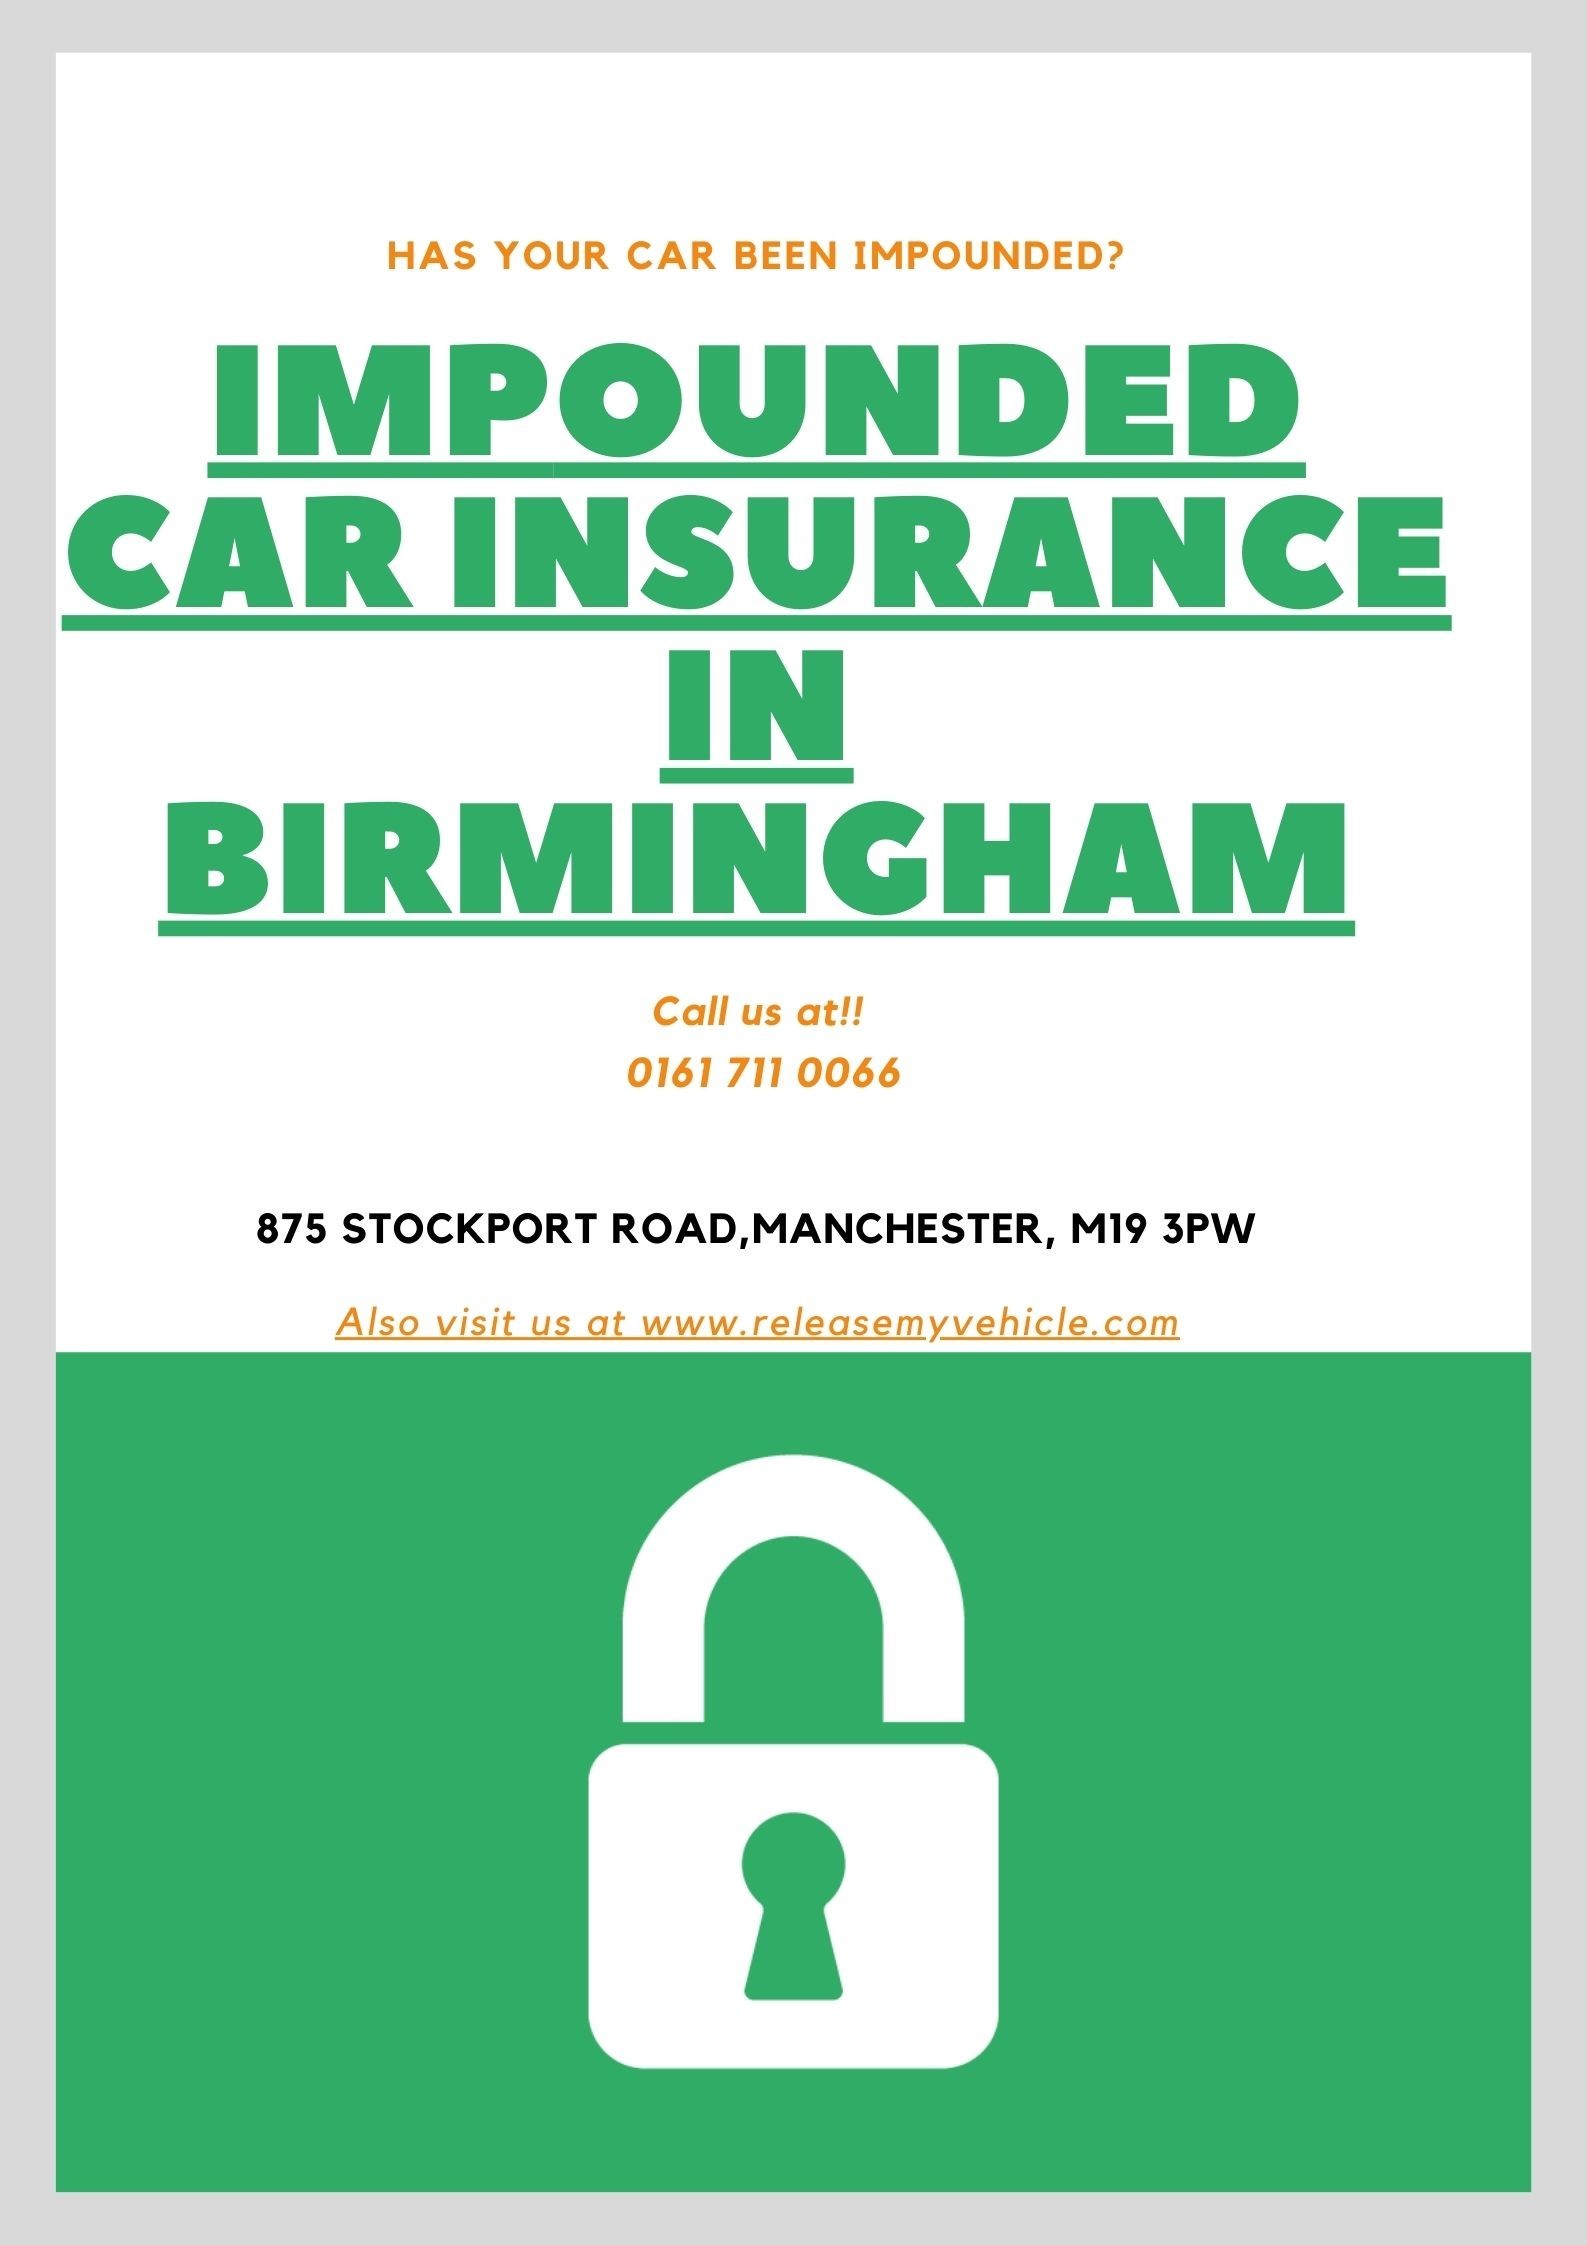 Impounded Car Insurance in Birmingham